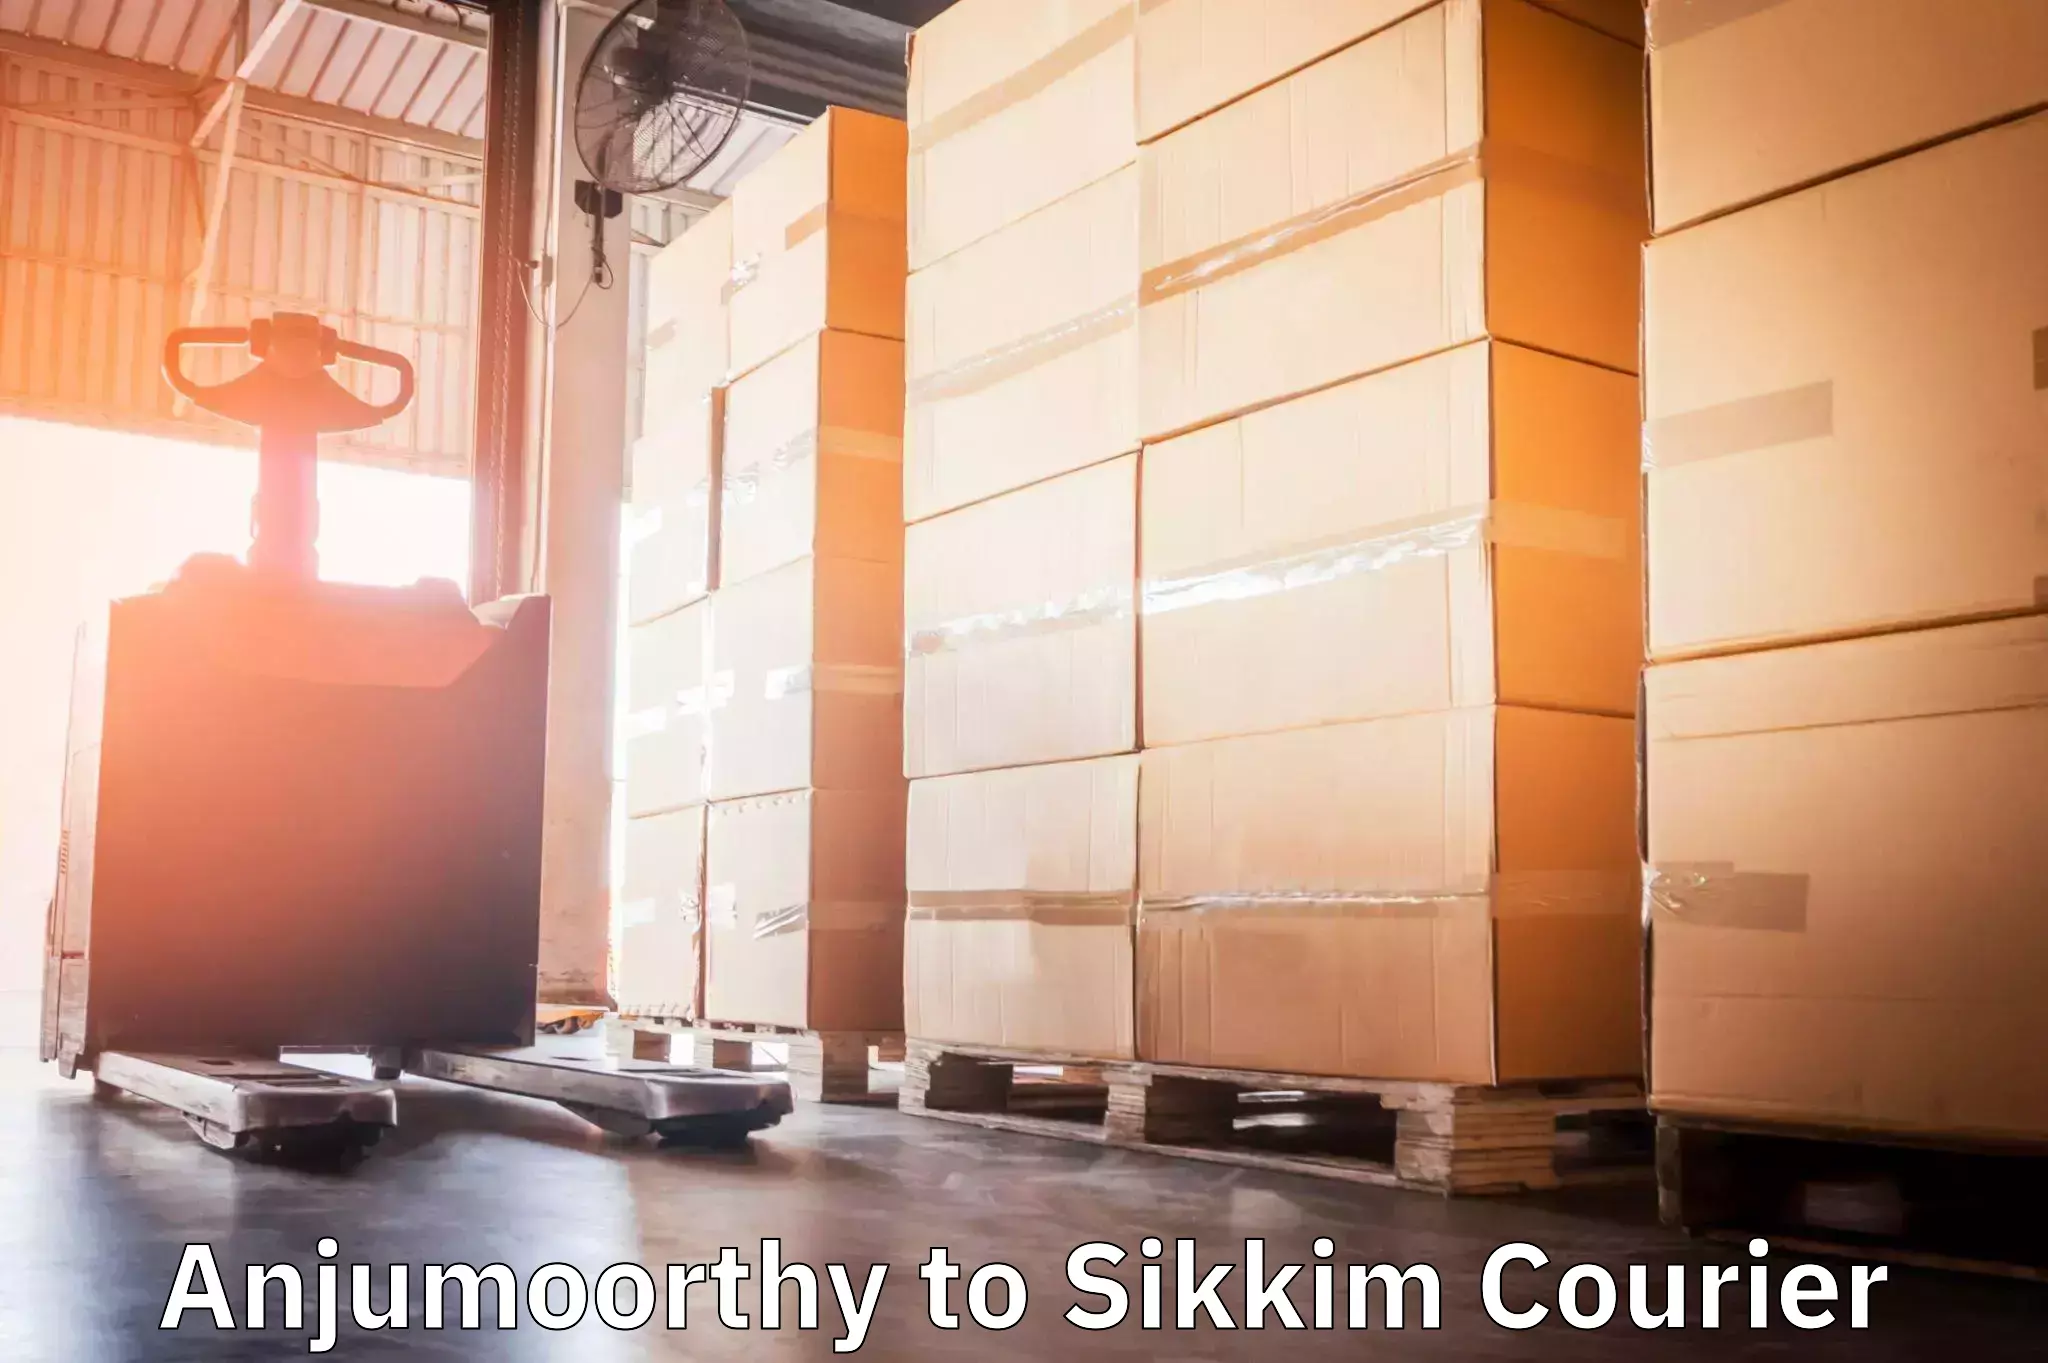 Easy access courier services Anjumoorthy to Sikkim